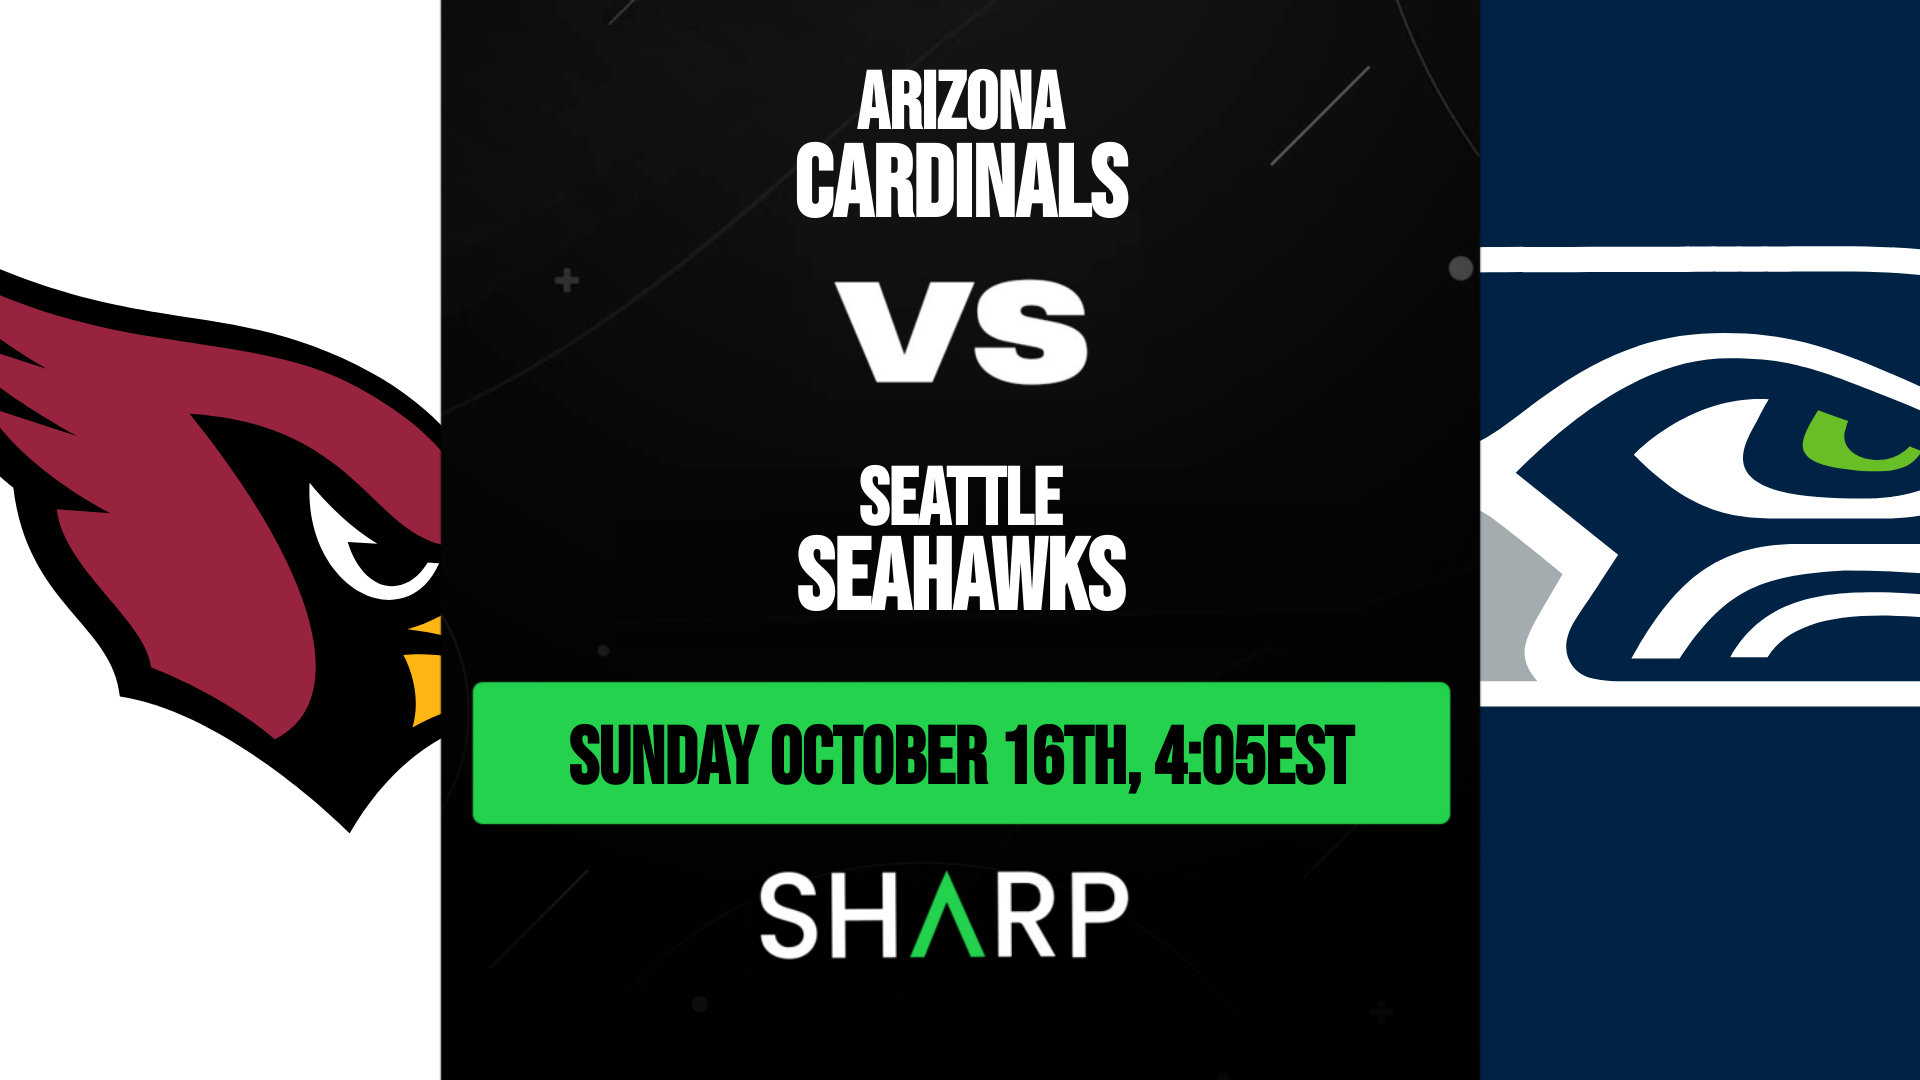 Arizona Cardinals vs Seattle Seahawks Matchup Preview - October